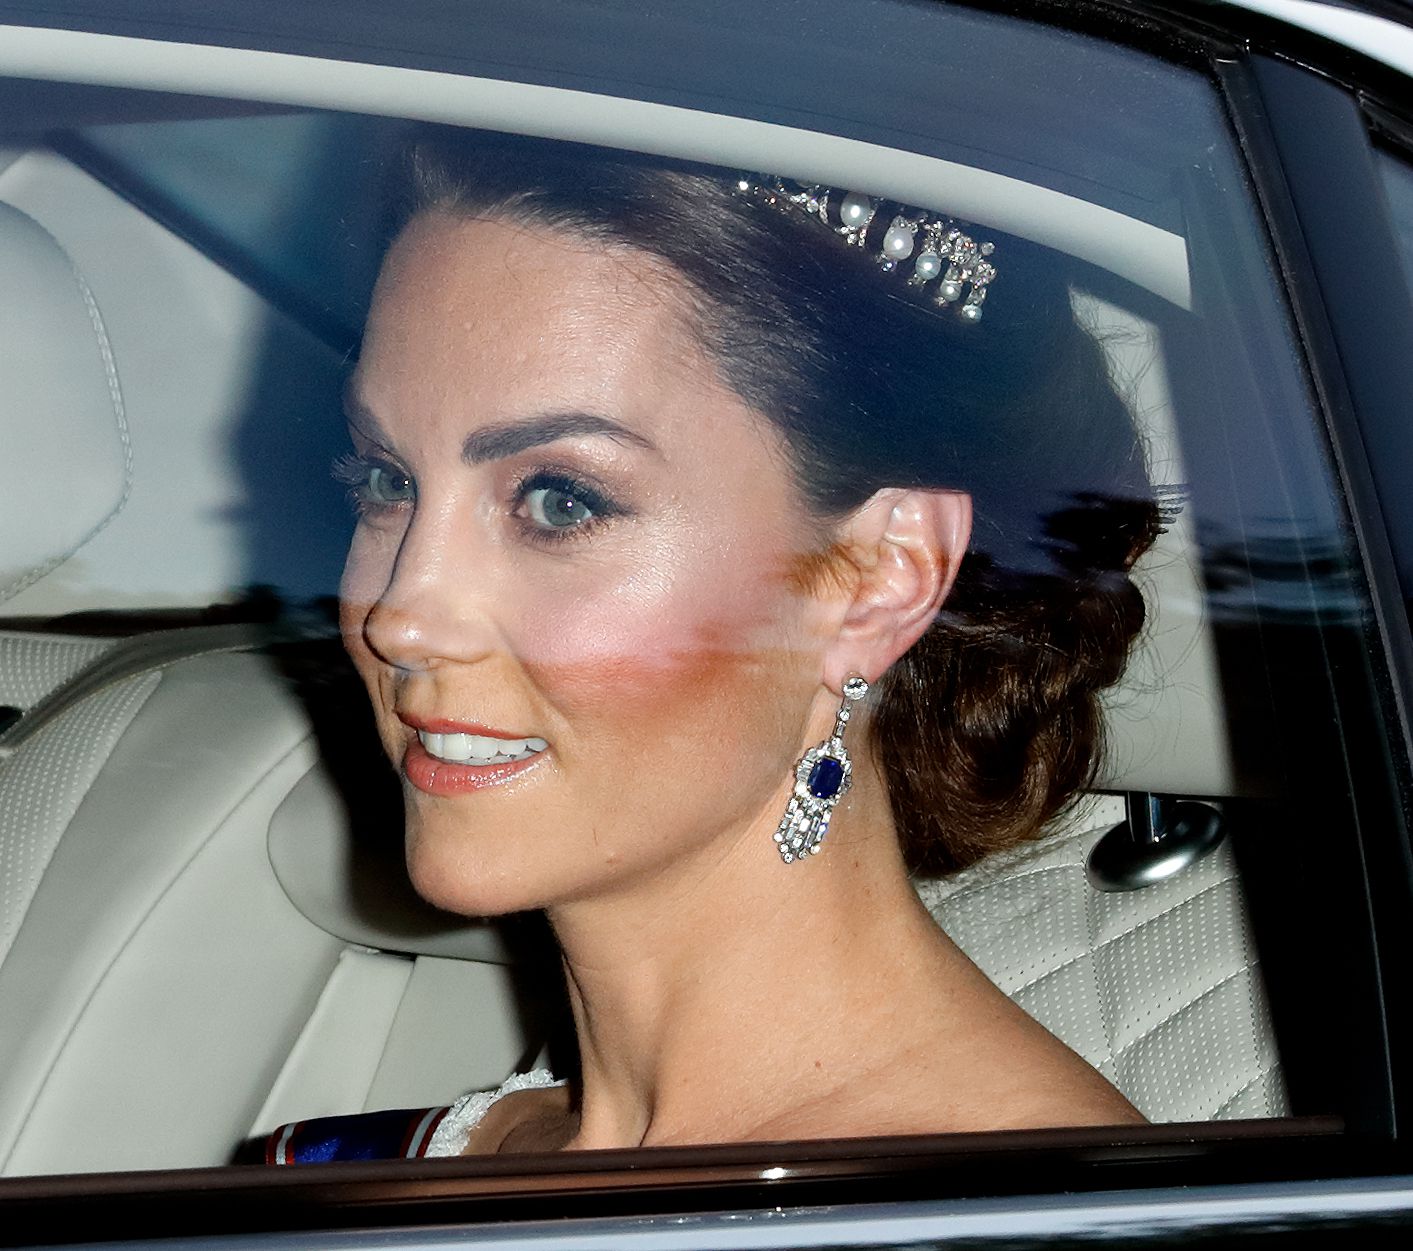 Kate Middleton the Duchess of Cambridge arrives at Buckingham Palace ahead of a State Banquet hosted by Queen Elizabeth II, June 3, 2019.